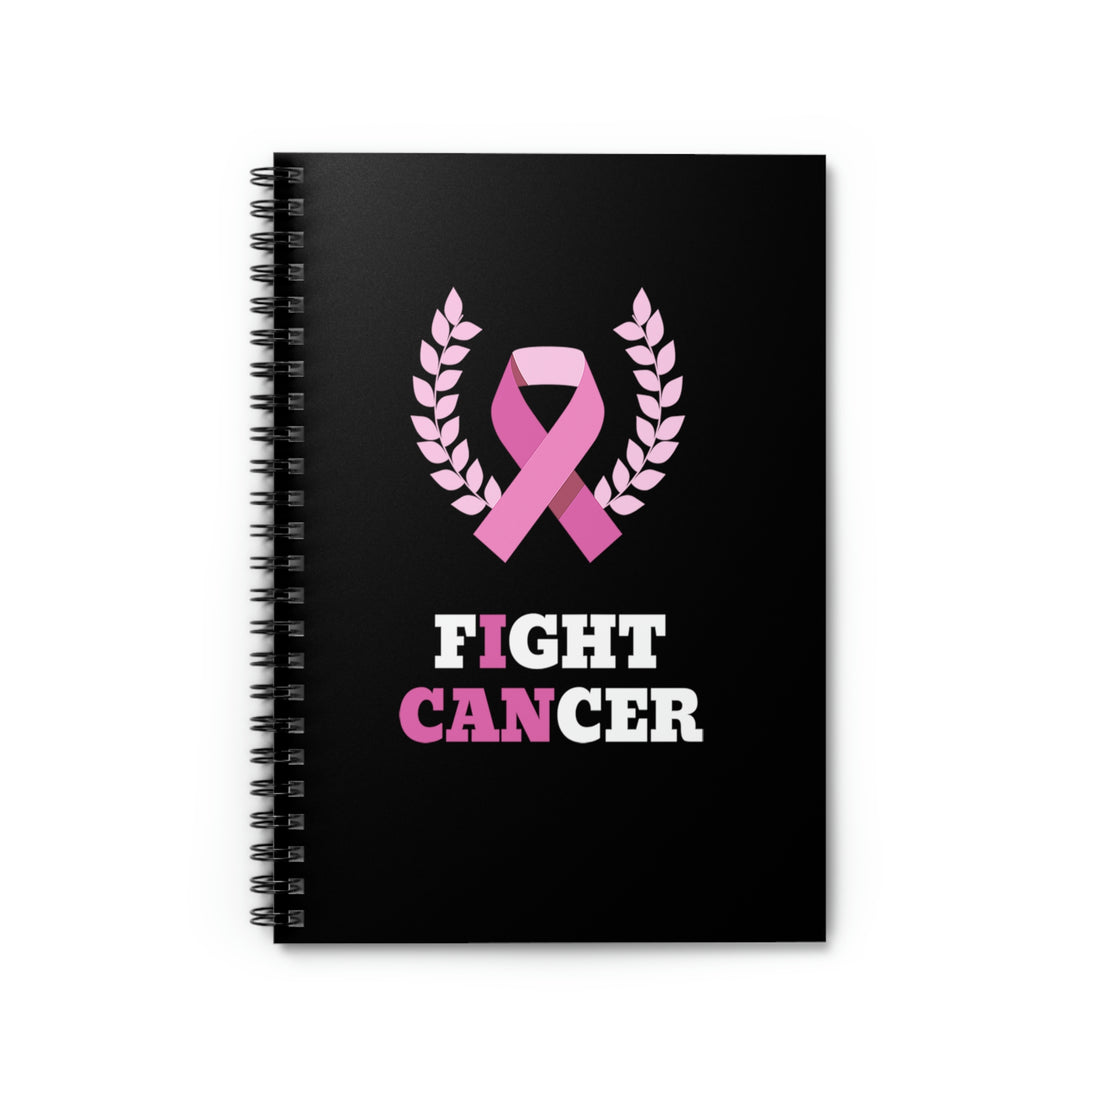 Fight Cancer I Can - Spiral Notebook - Ruled Line